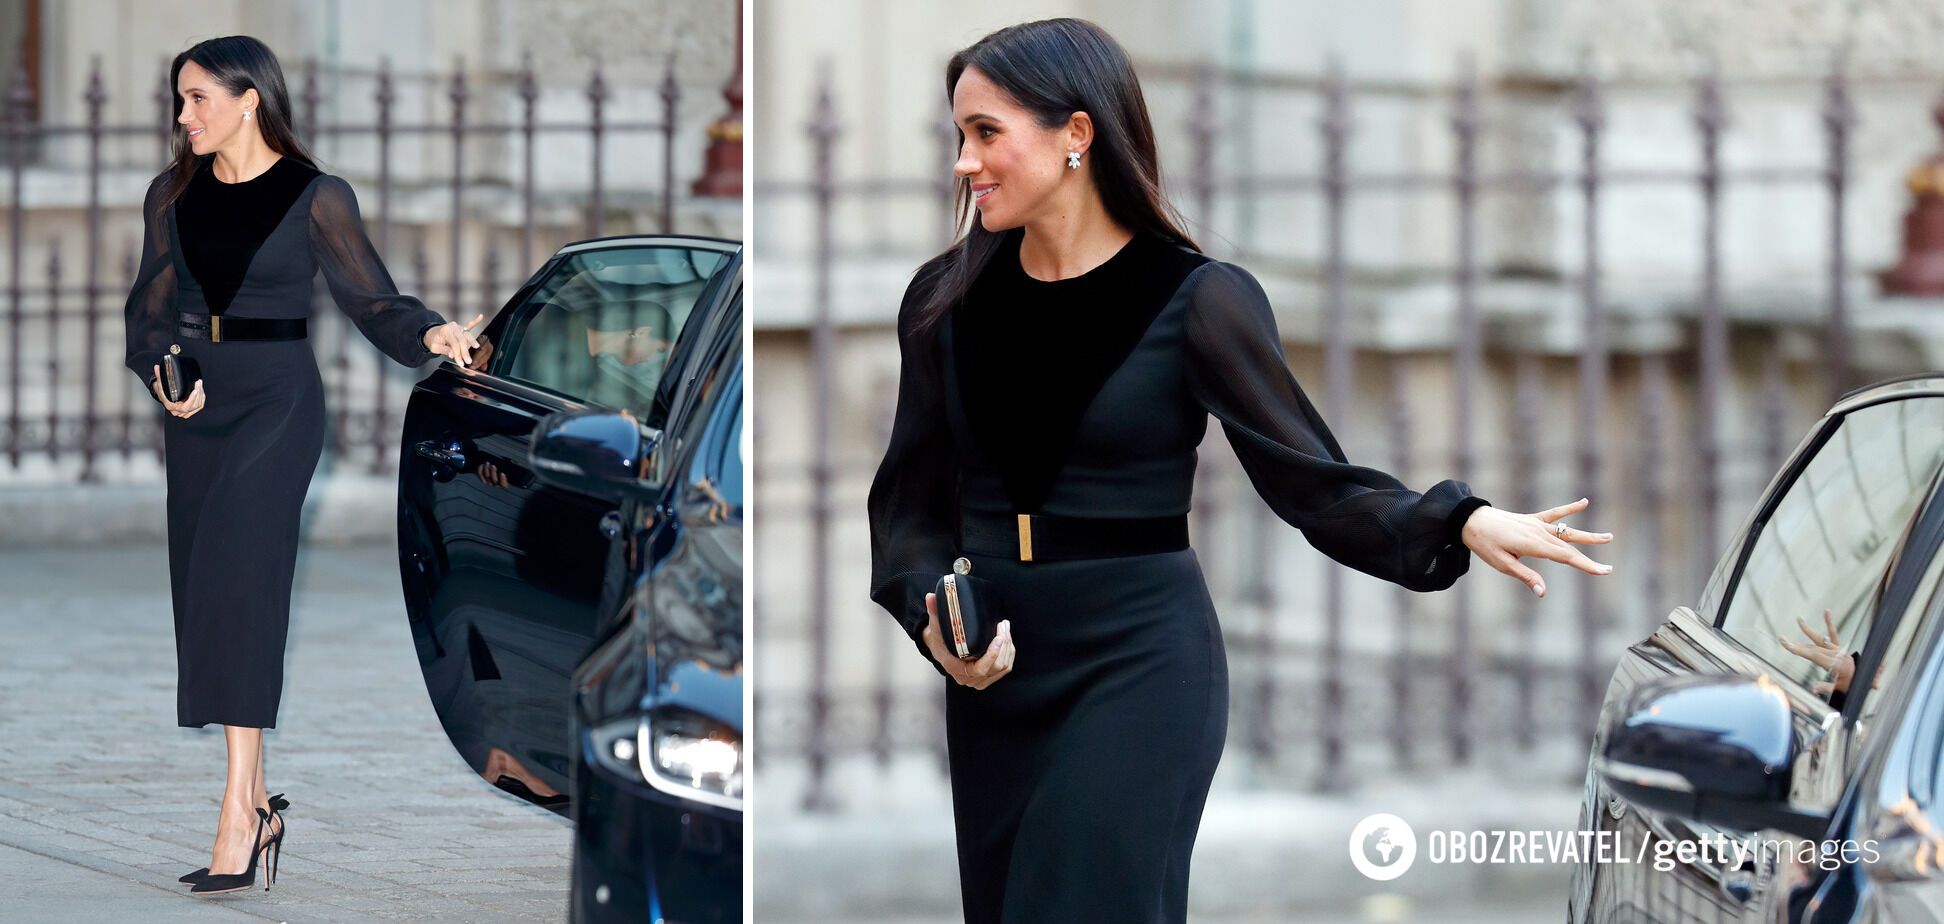 Video of Meghan Markle breaking royal protocol goes viral